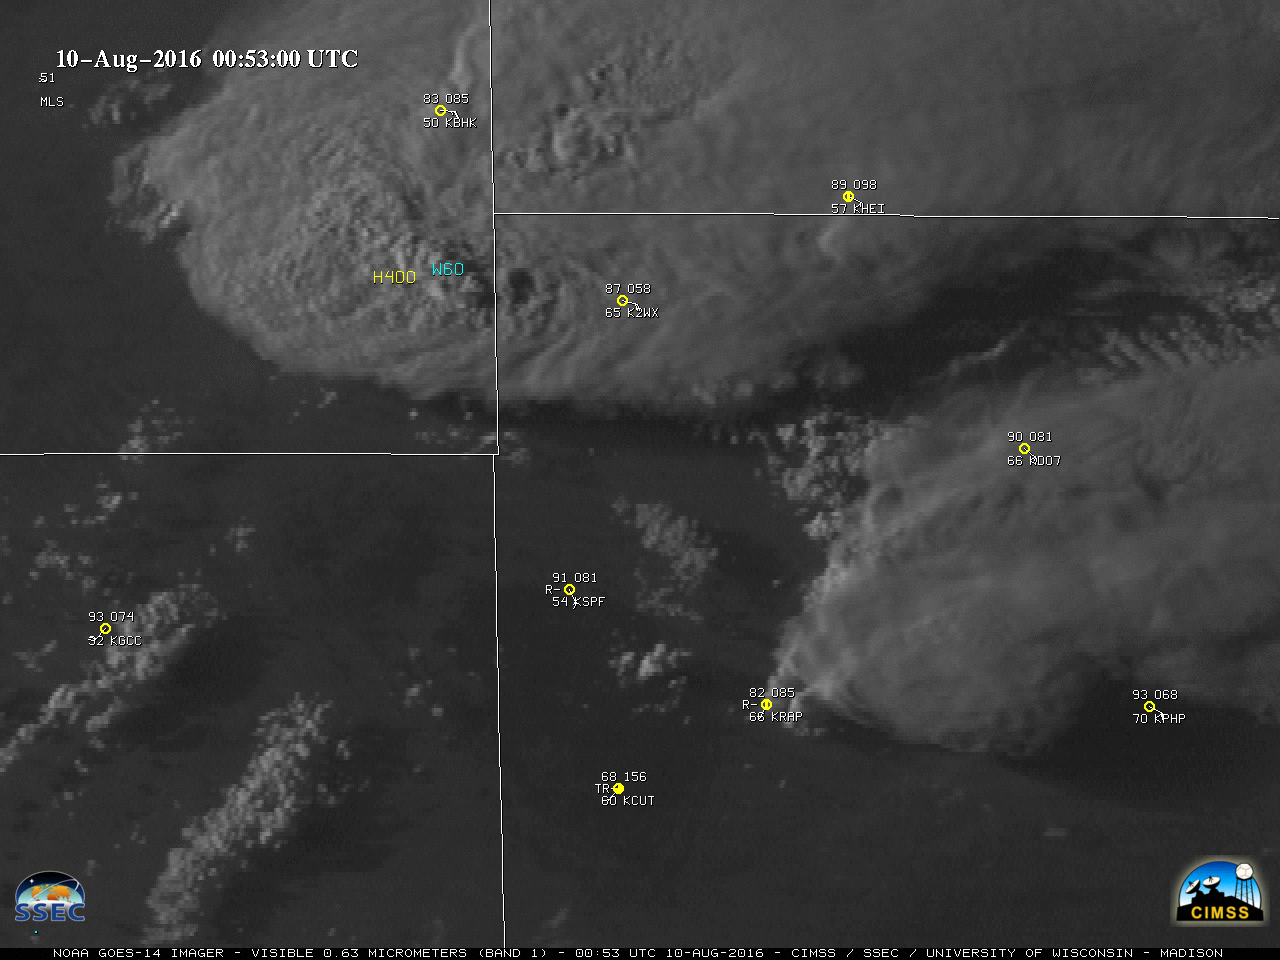 GOES-14 Visible (0.62 µm) images, with surface reports and SPC storm reports of hail (yellow) and wind (cyan) [click to play MP4 animation]